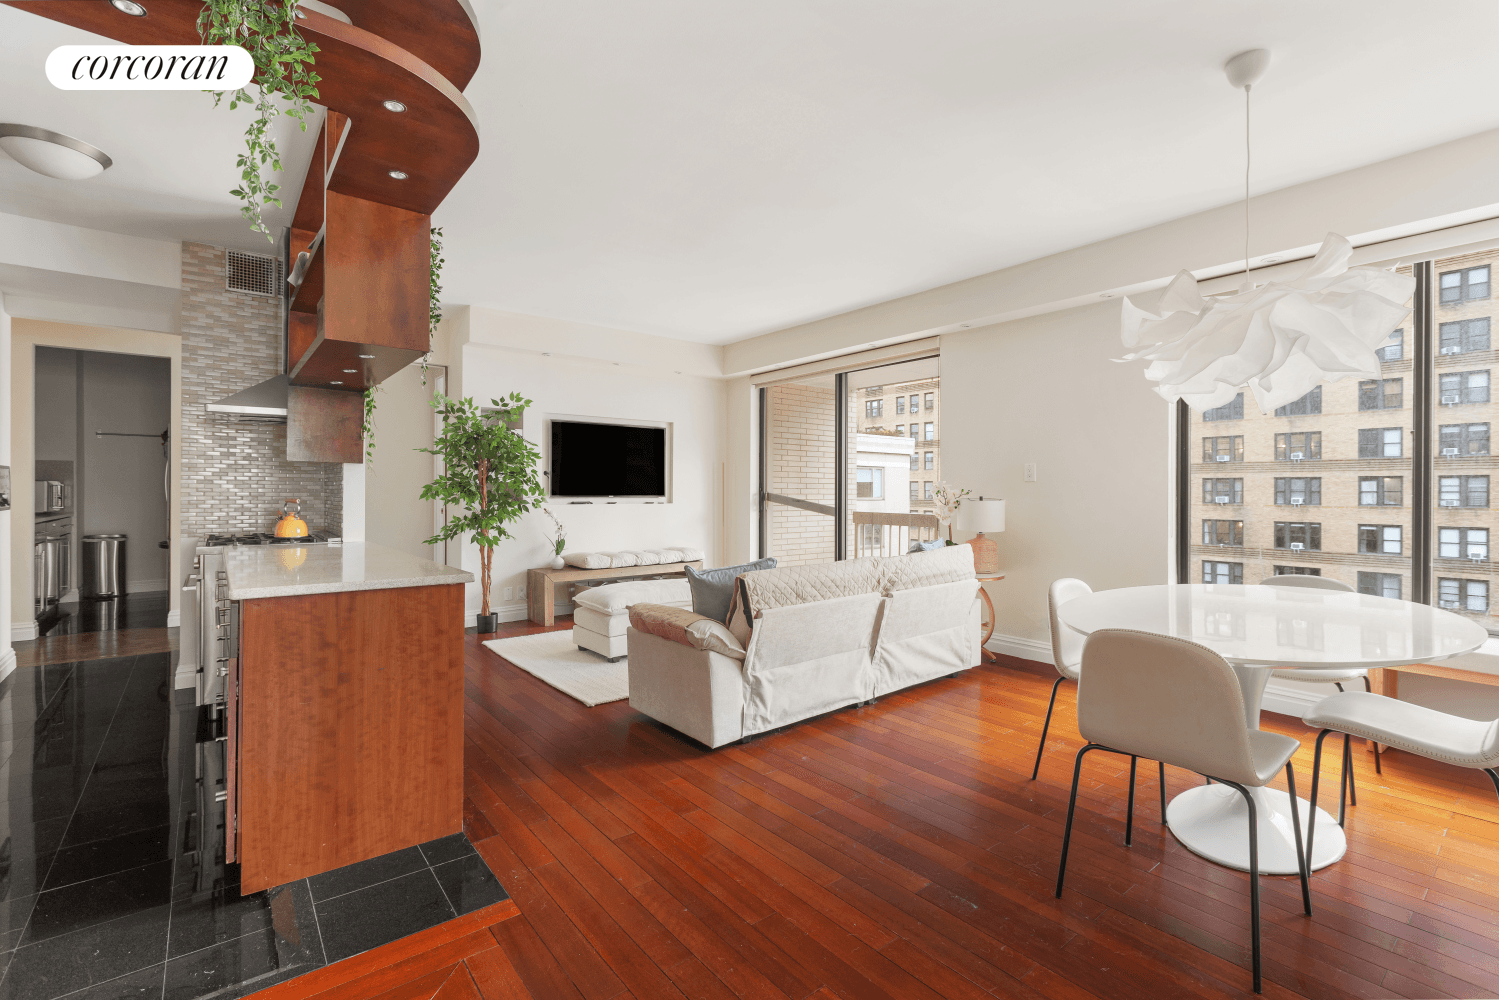 Offered Fully FurnishedApartment 6KL at 200 East 69th StreetThree Bedrooms Two Bathrooms Over 1, 300 SqFt of interior spaceApartment 6KL is a spacious three bedroom, two and a half bath ...